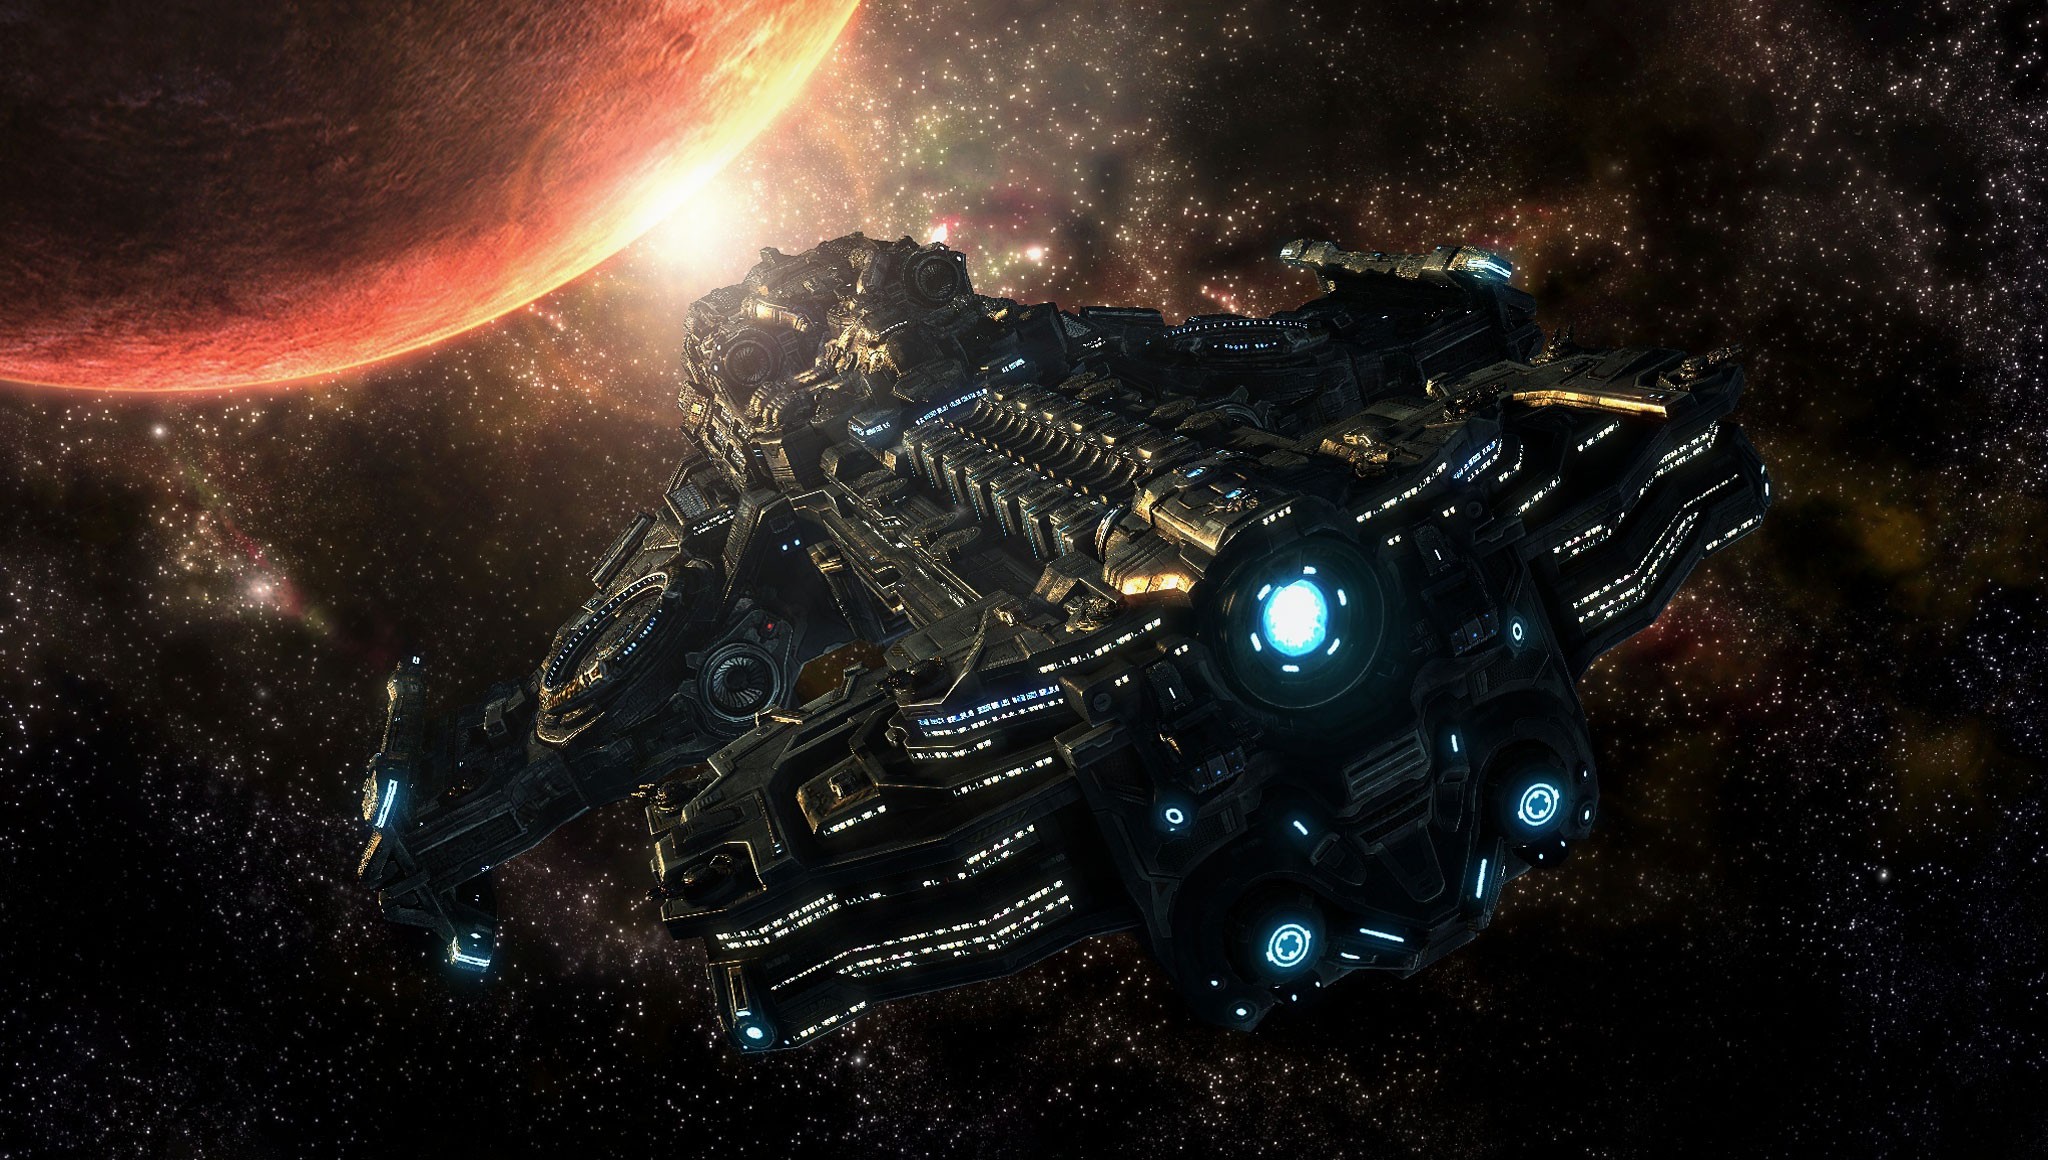 General 2048x1160 Starcraft II video games vehicle science fiction PC gaming spaceship video game art